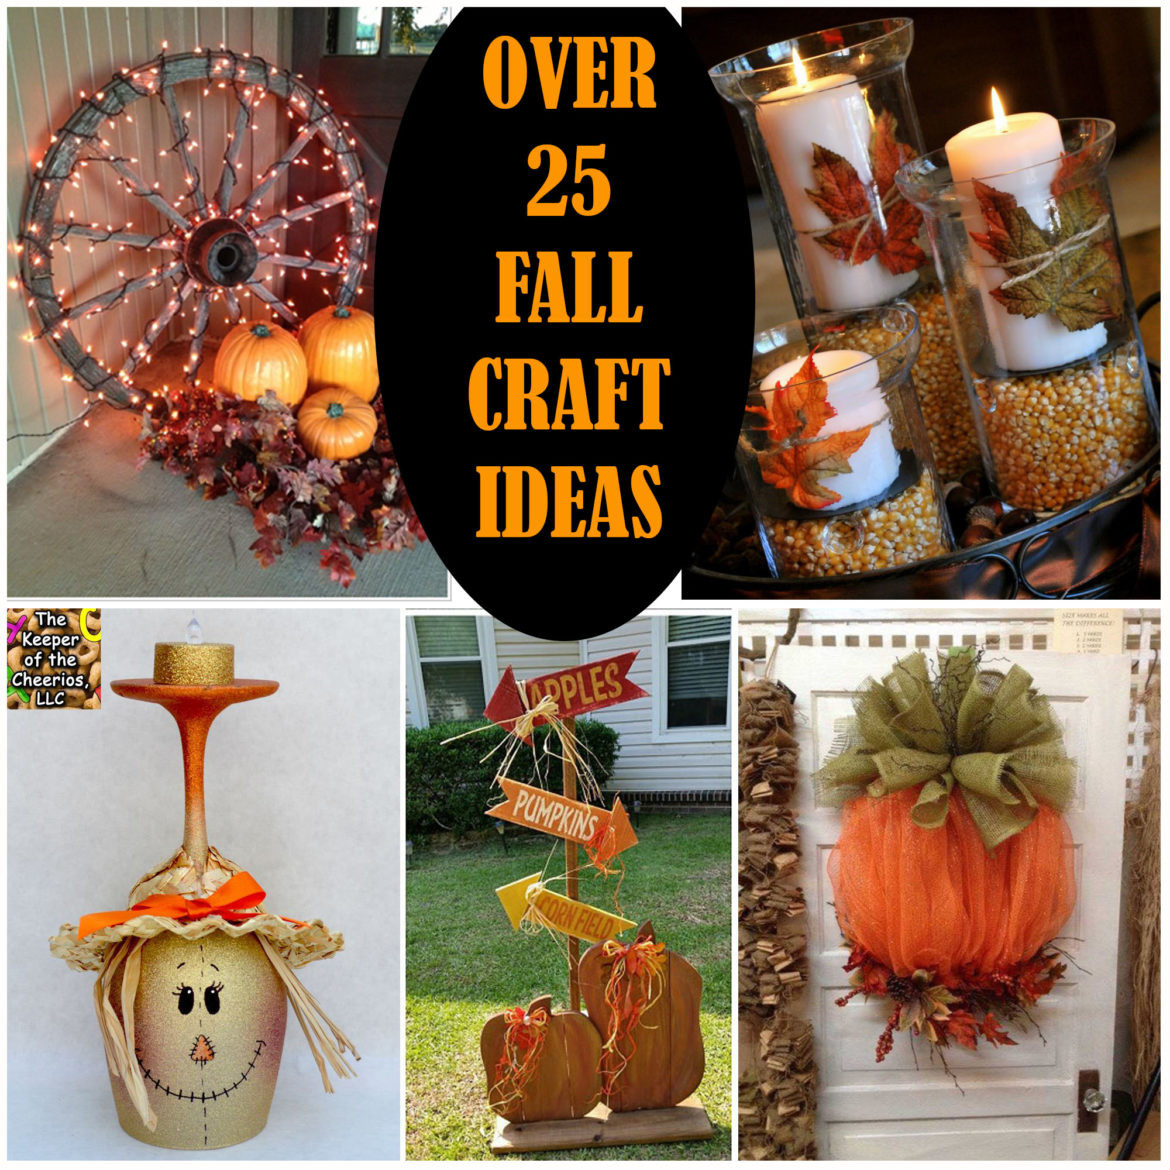 Fall Halloween Craft Ideas
 FANTASTIC FALL and HALLOWEEN IDEAS The Keeper of the